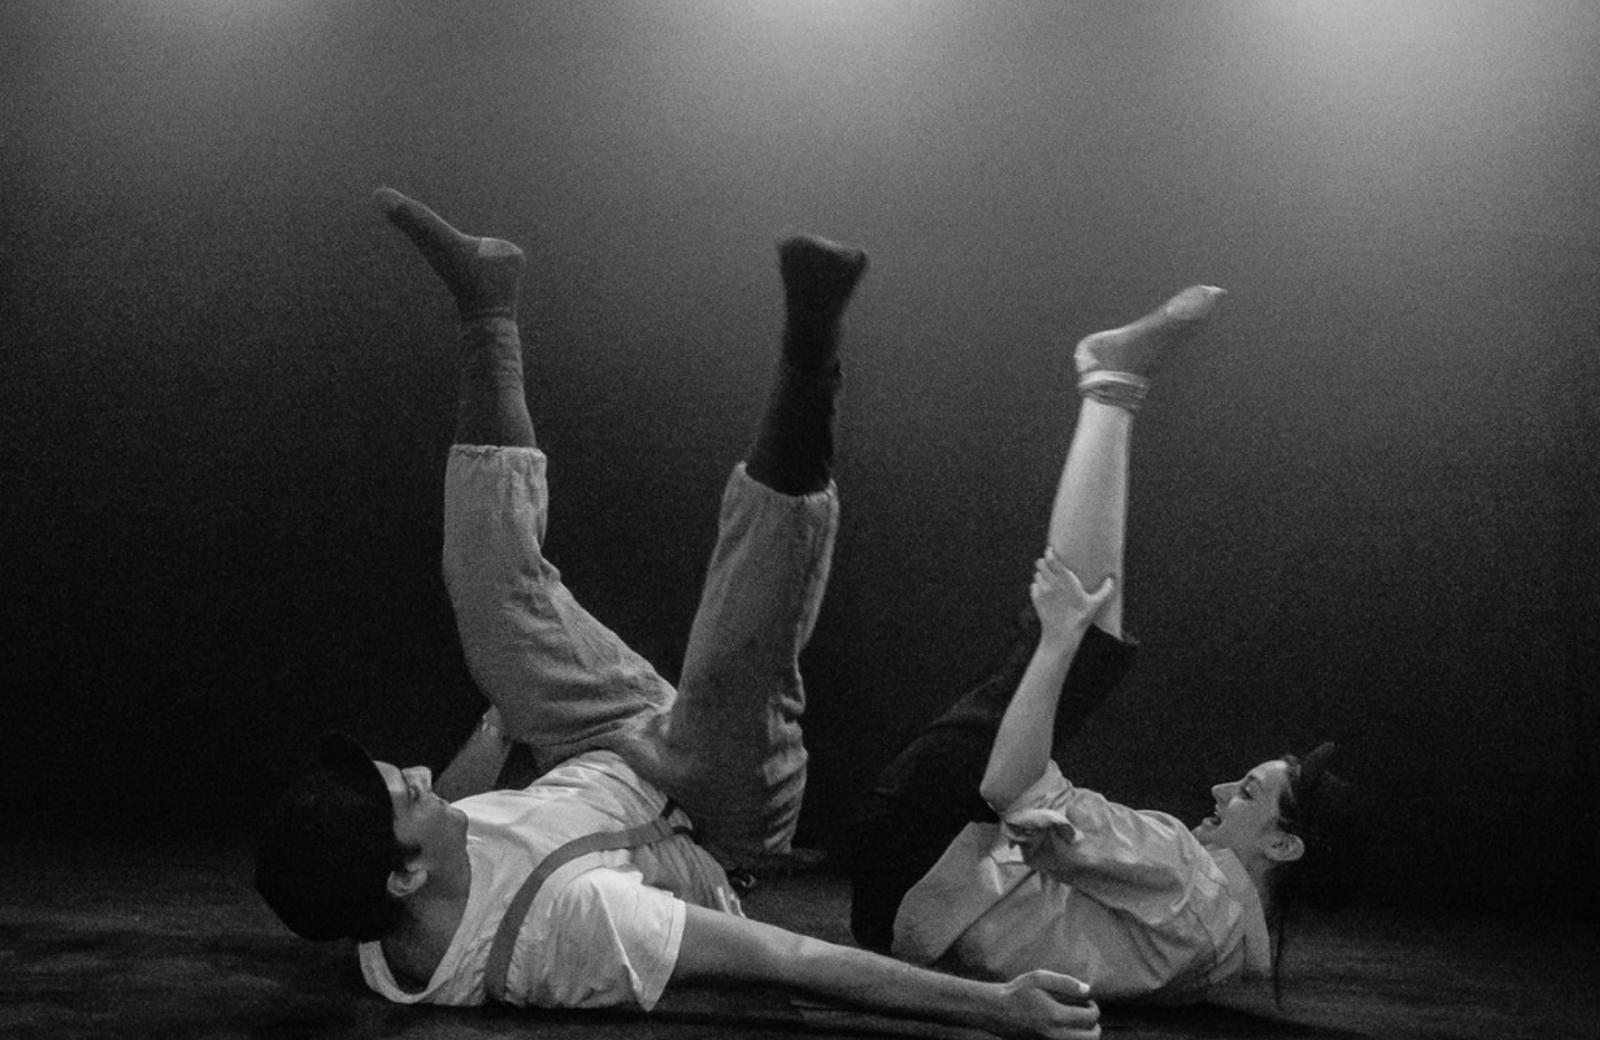 Two people on their bands with knees in the air, smiling, wearing bowler hats. Photo is in black and white, like a comedy classic